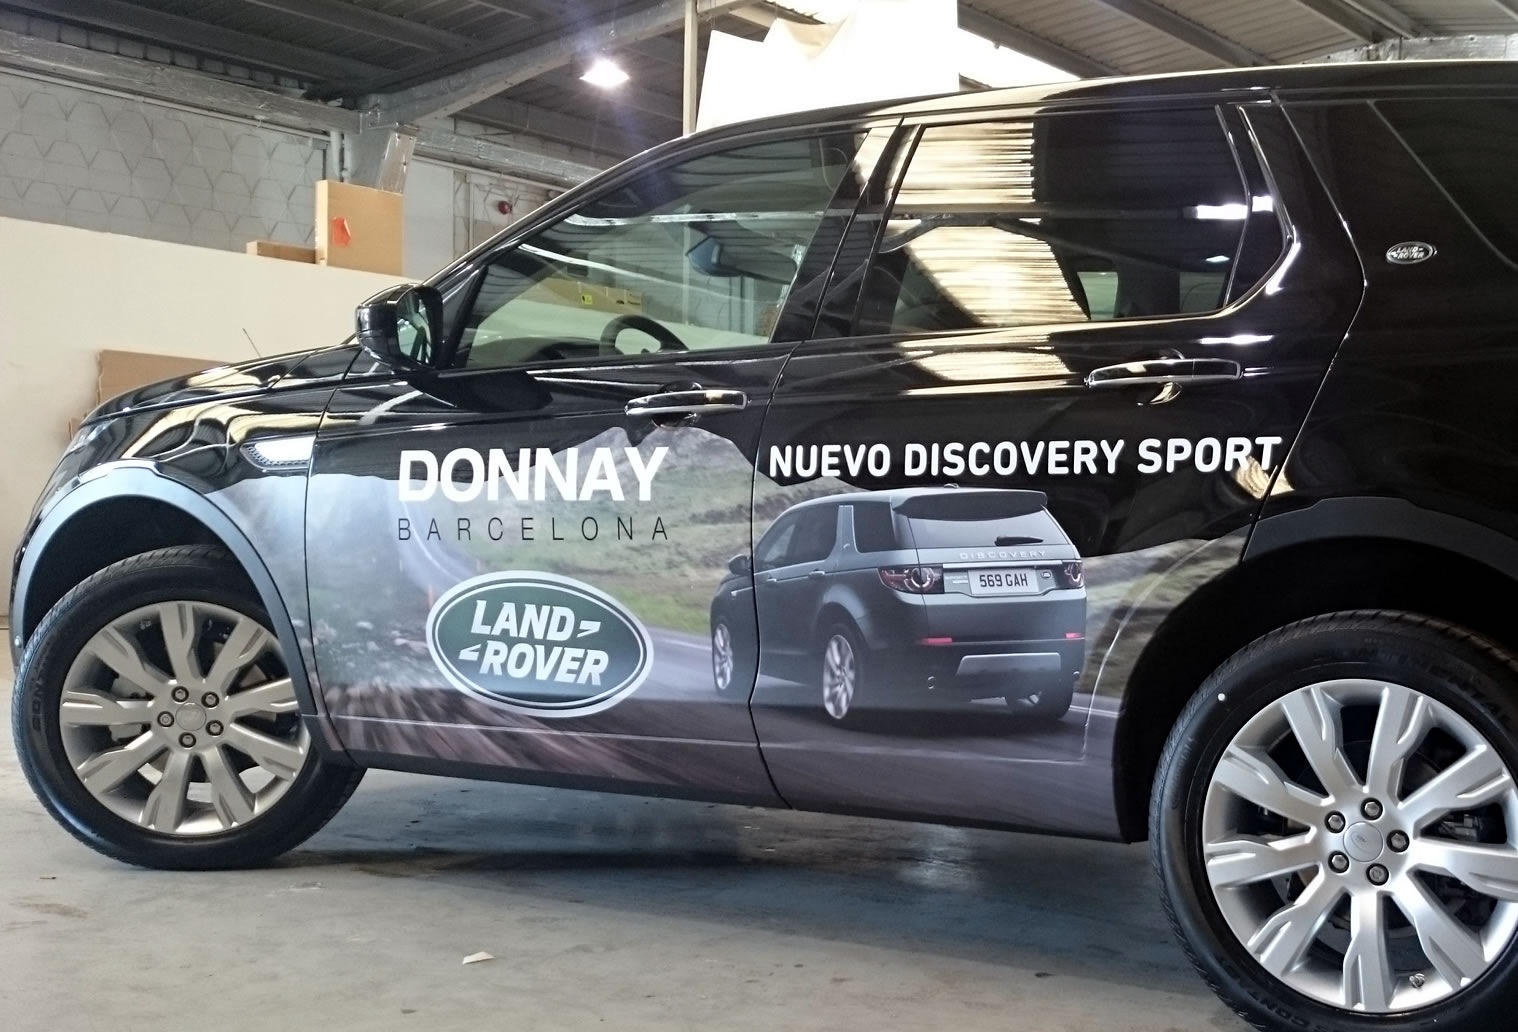 Land Rover Donnay